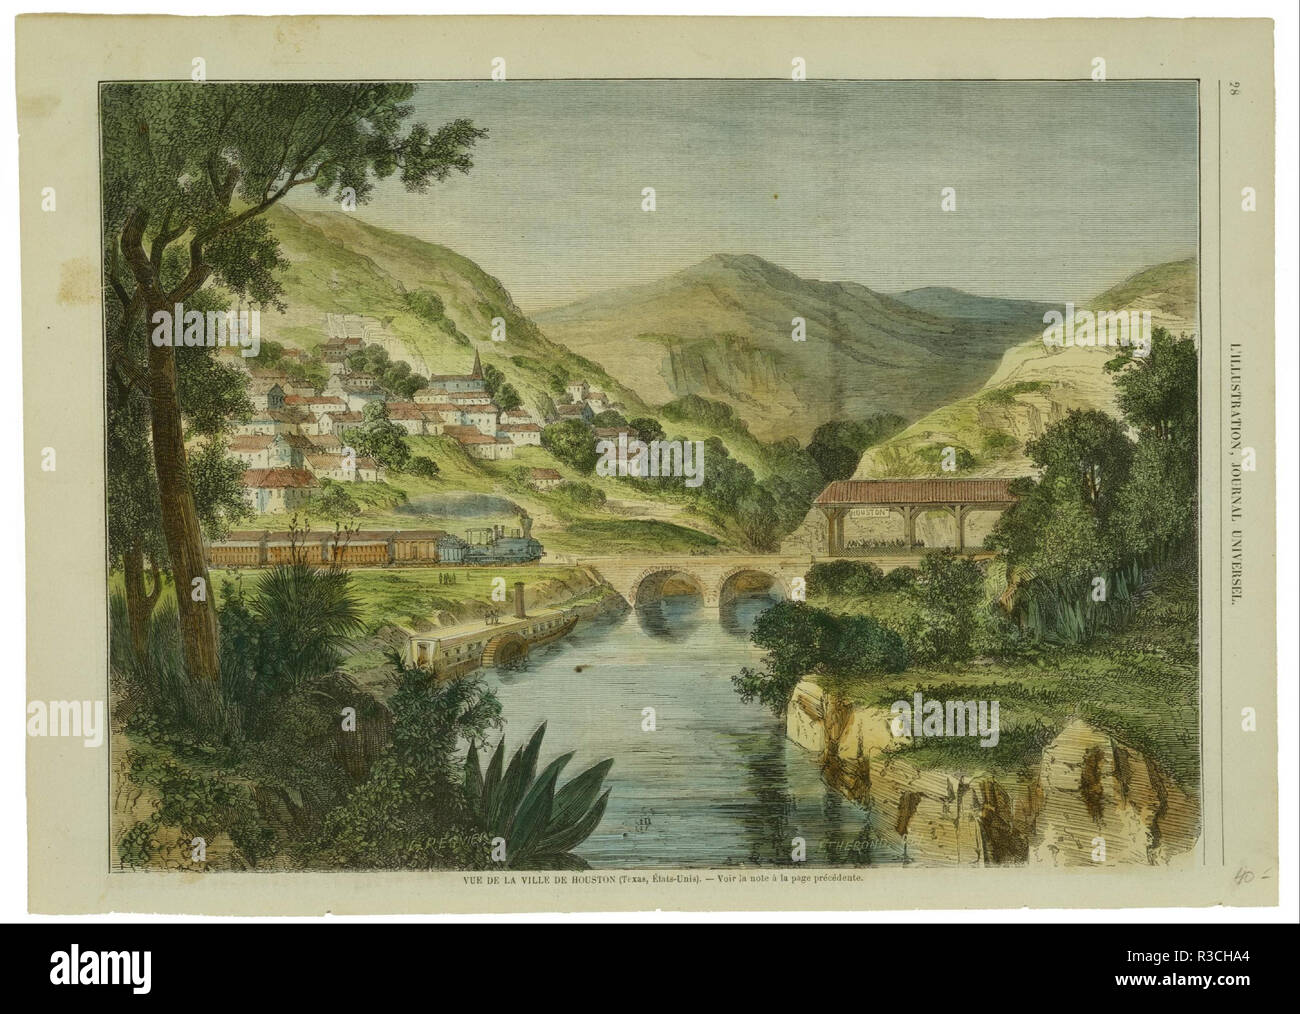 Vue de la Ville de Houston. Date/Period: 1853/1867. Hand-colored wood engraving on wove wood pulp paper. Width: 36.8 cm. Height: 26 cm (sheet). Author: Possibly by E. Therond. Stock Photo